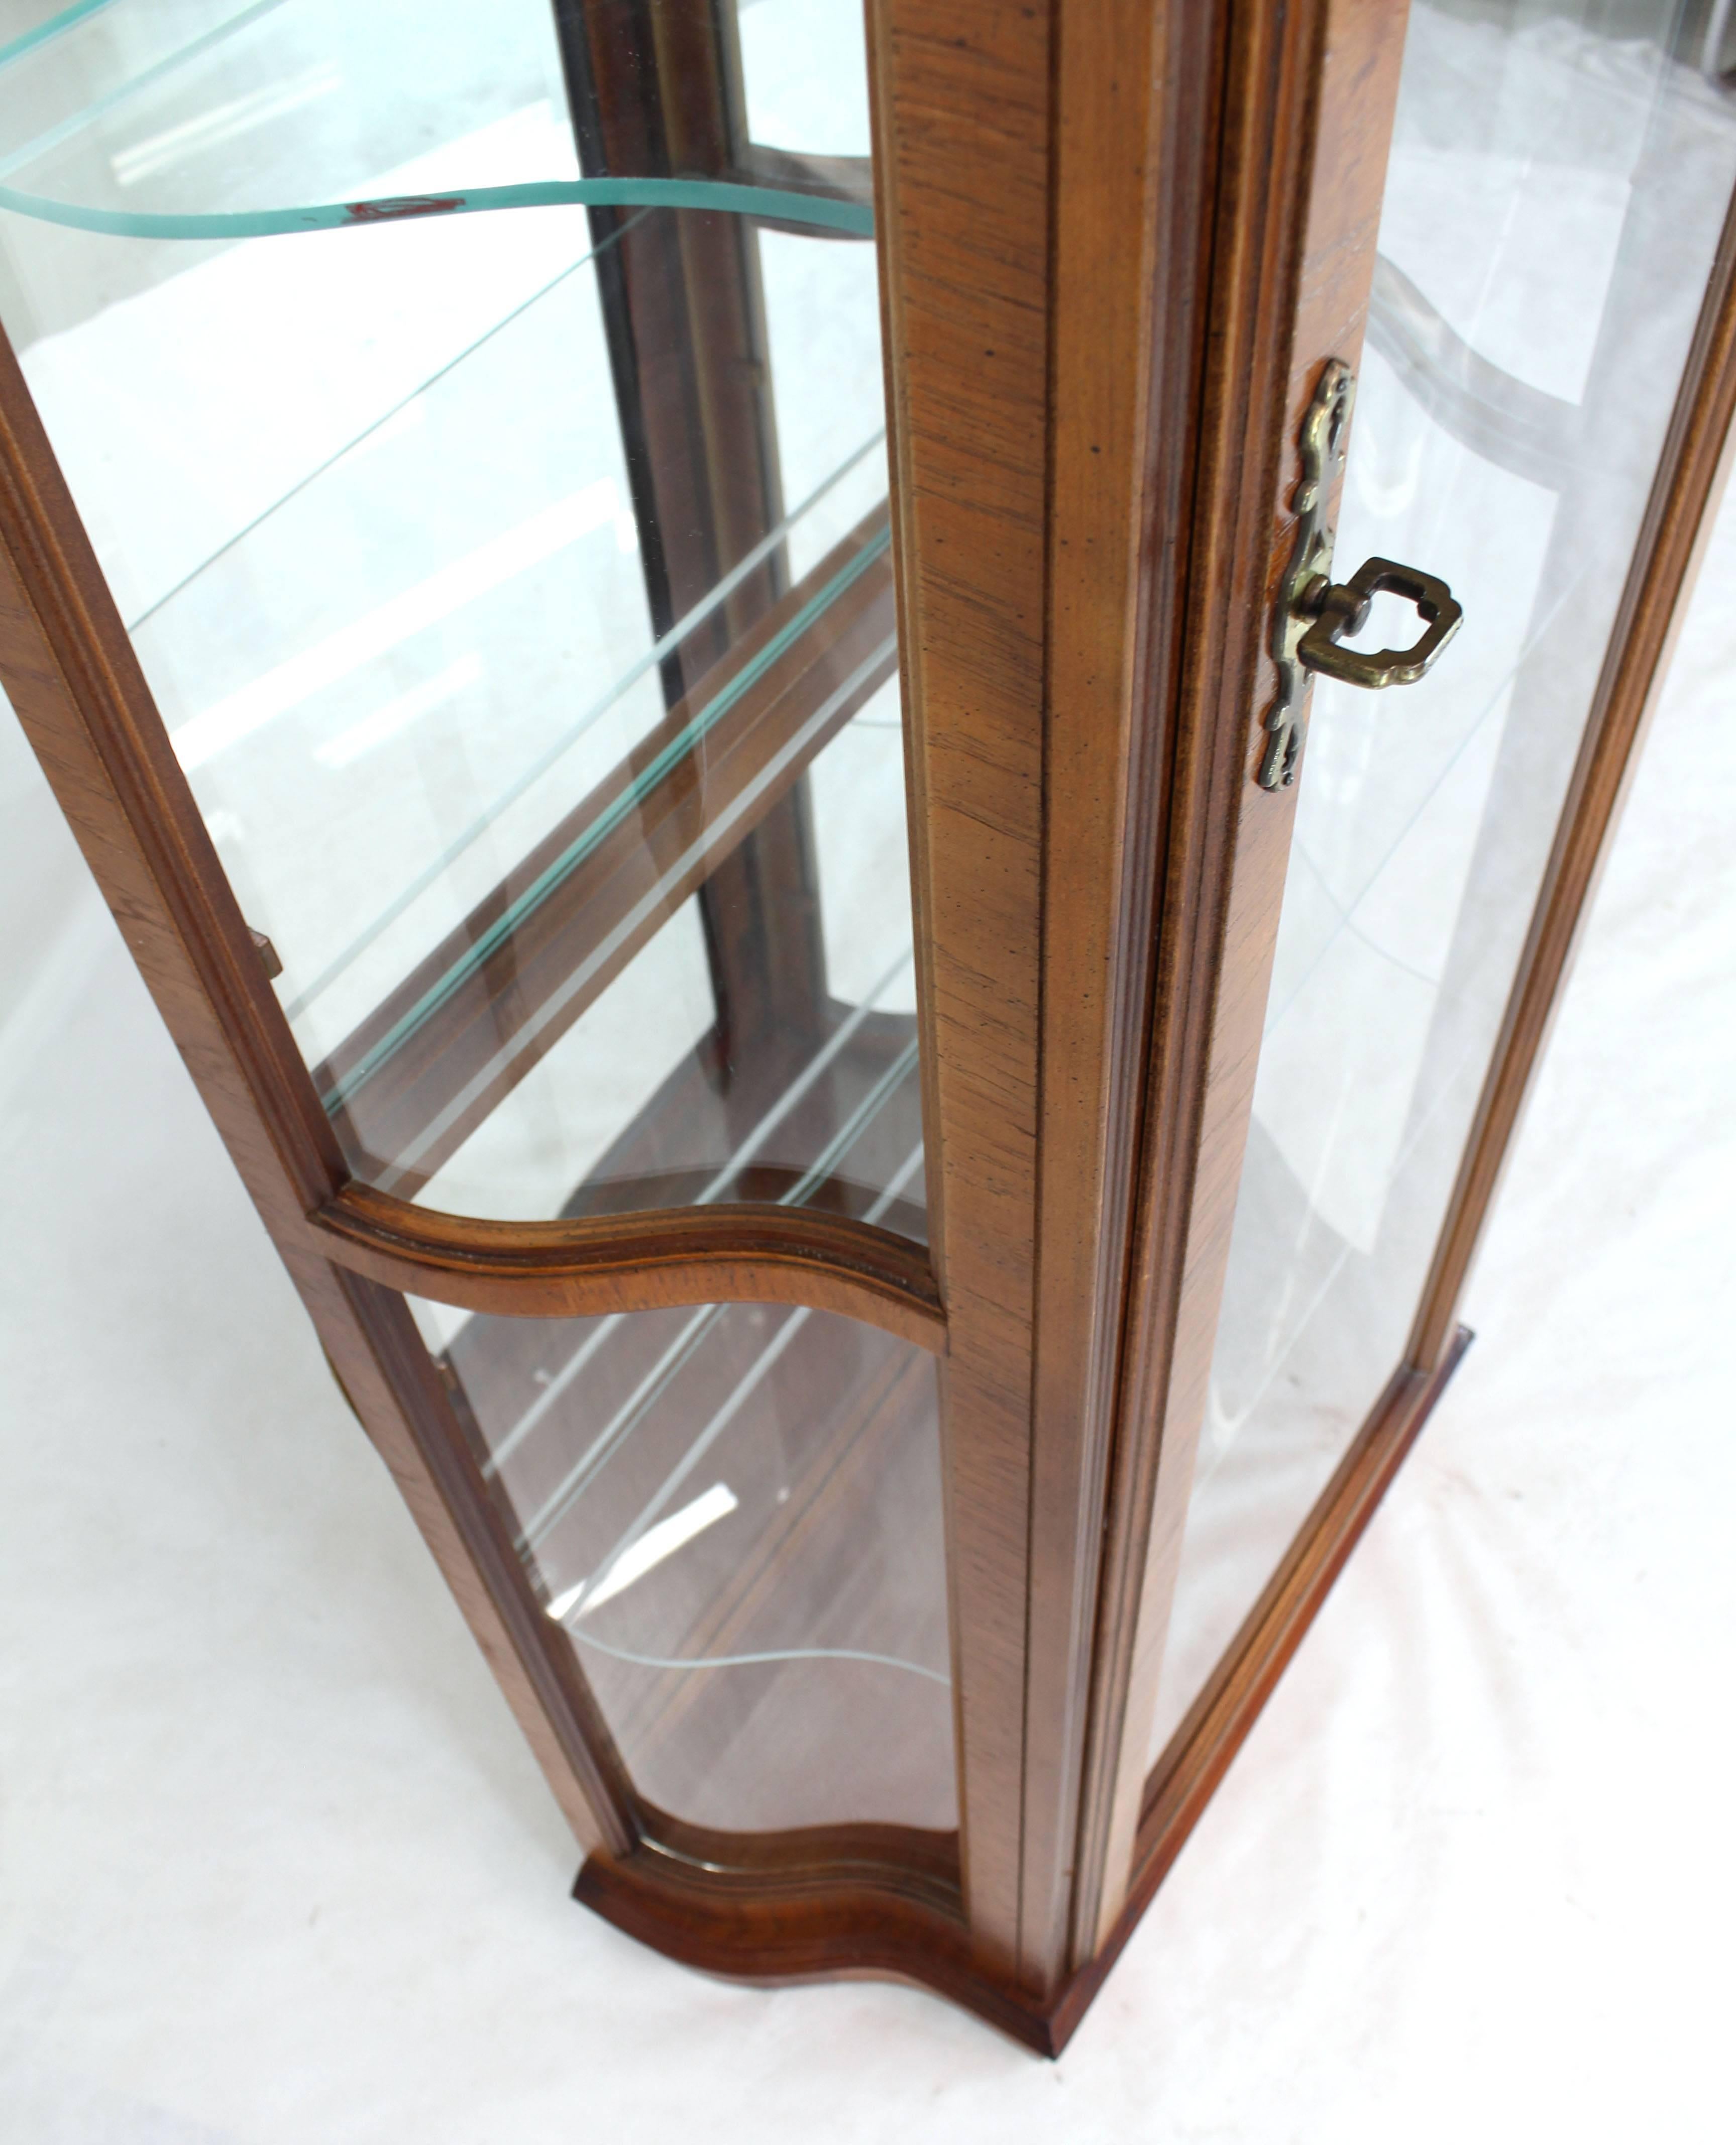 Very nice curved glass tall display curio cabinet with built in lights.